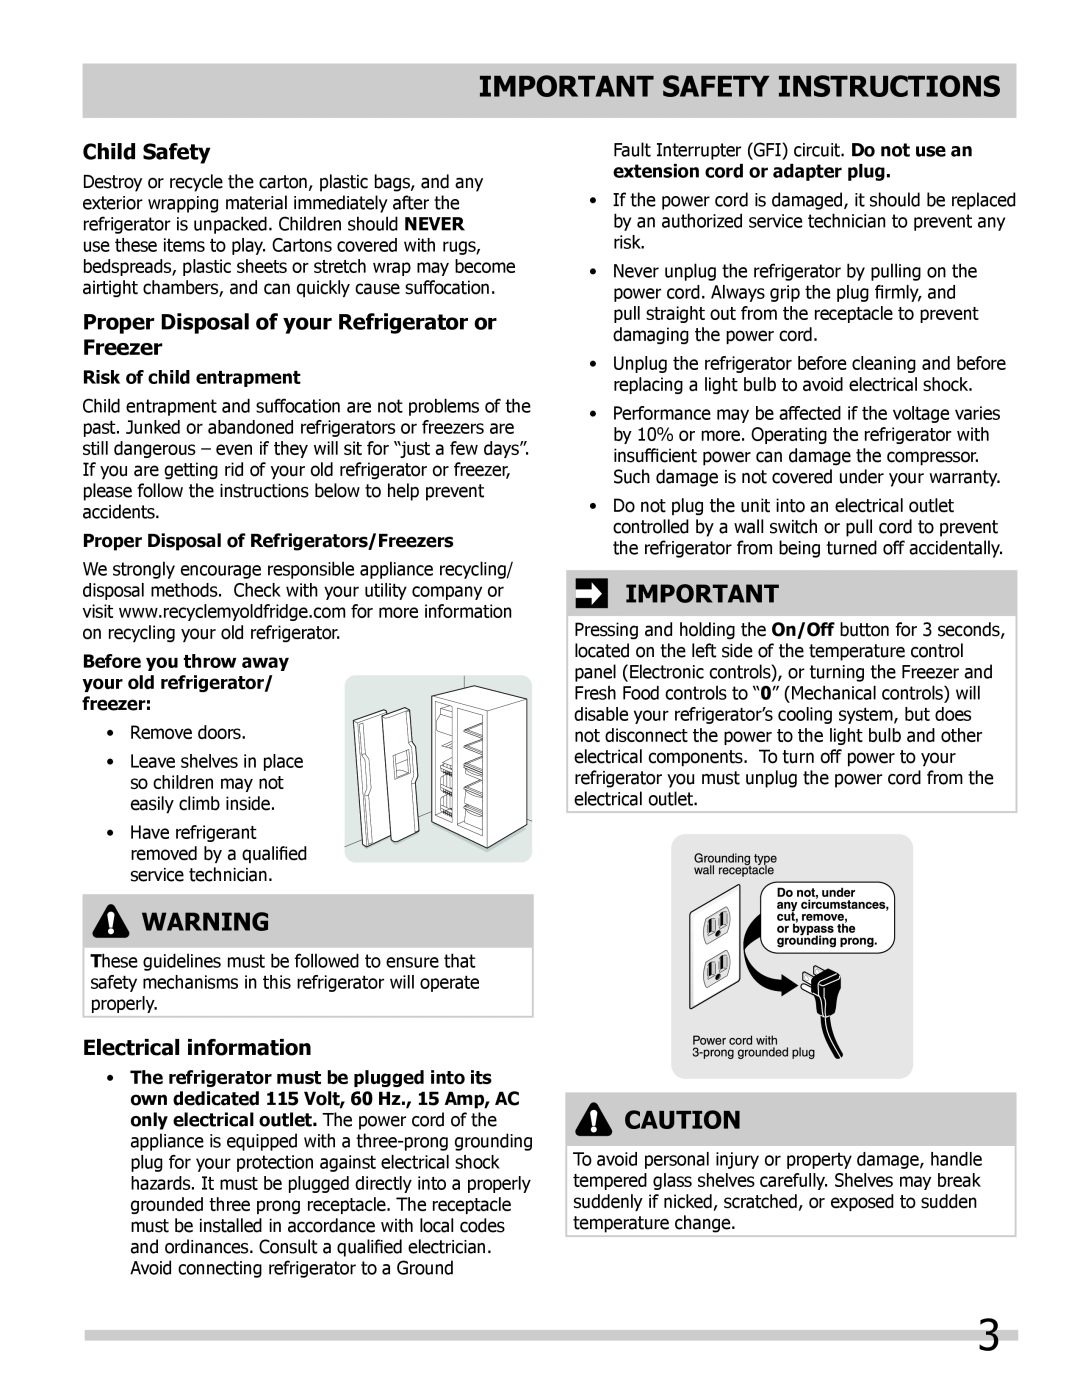 Frigidaire 242111900 manual Child Safety, Proper Disposal of your Refrigerator or Freezer, Electrical information 